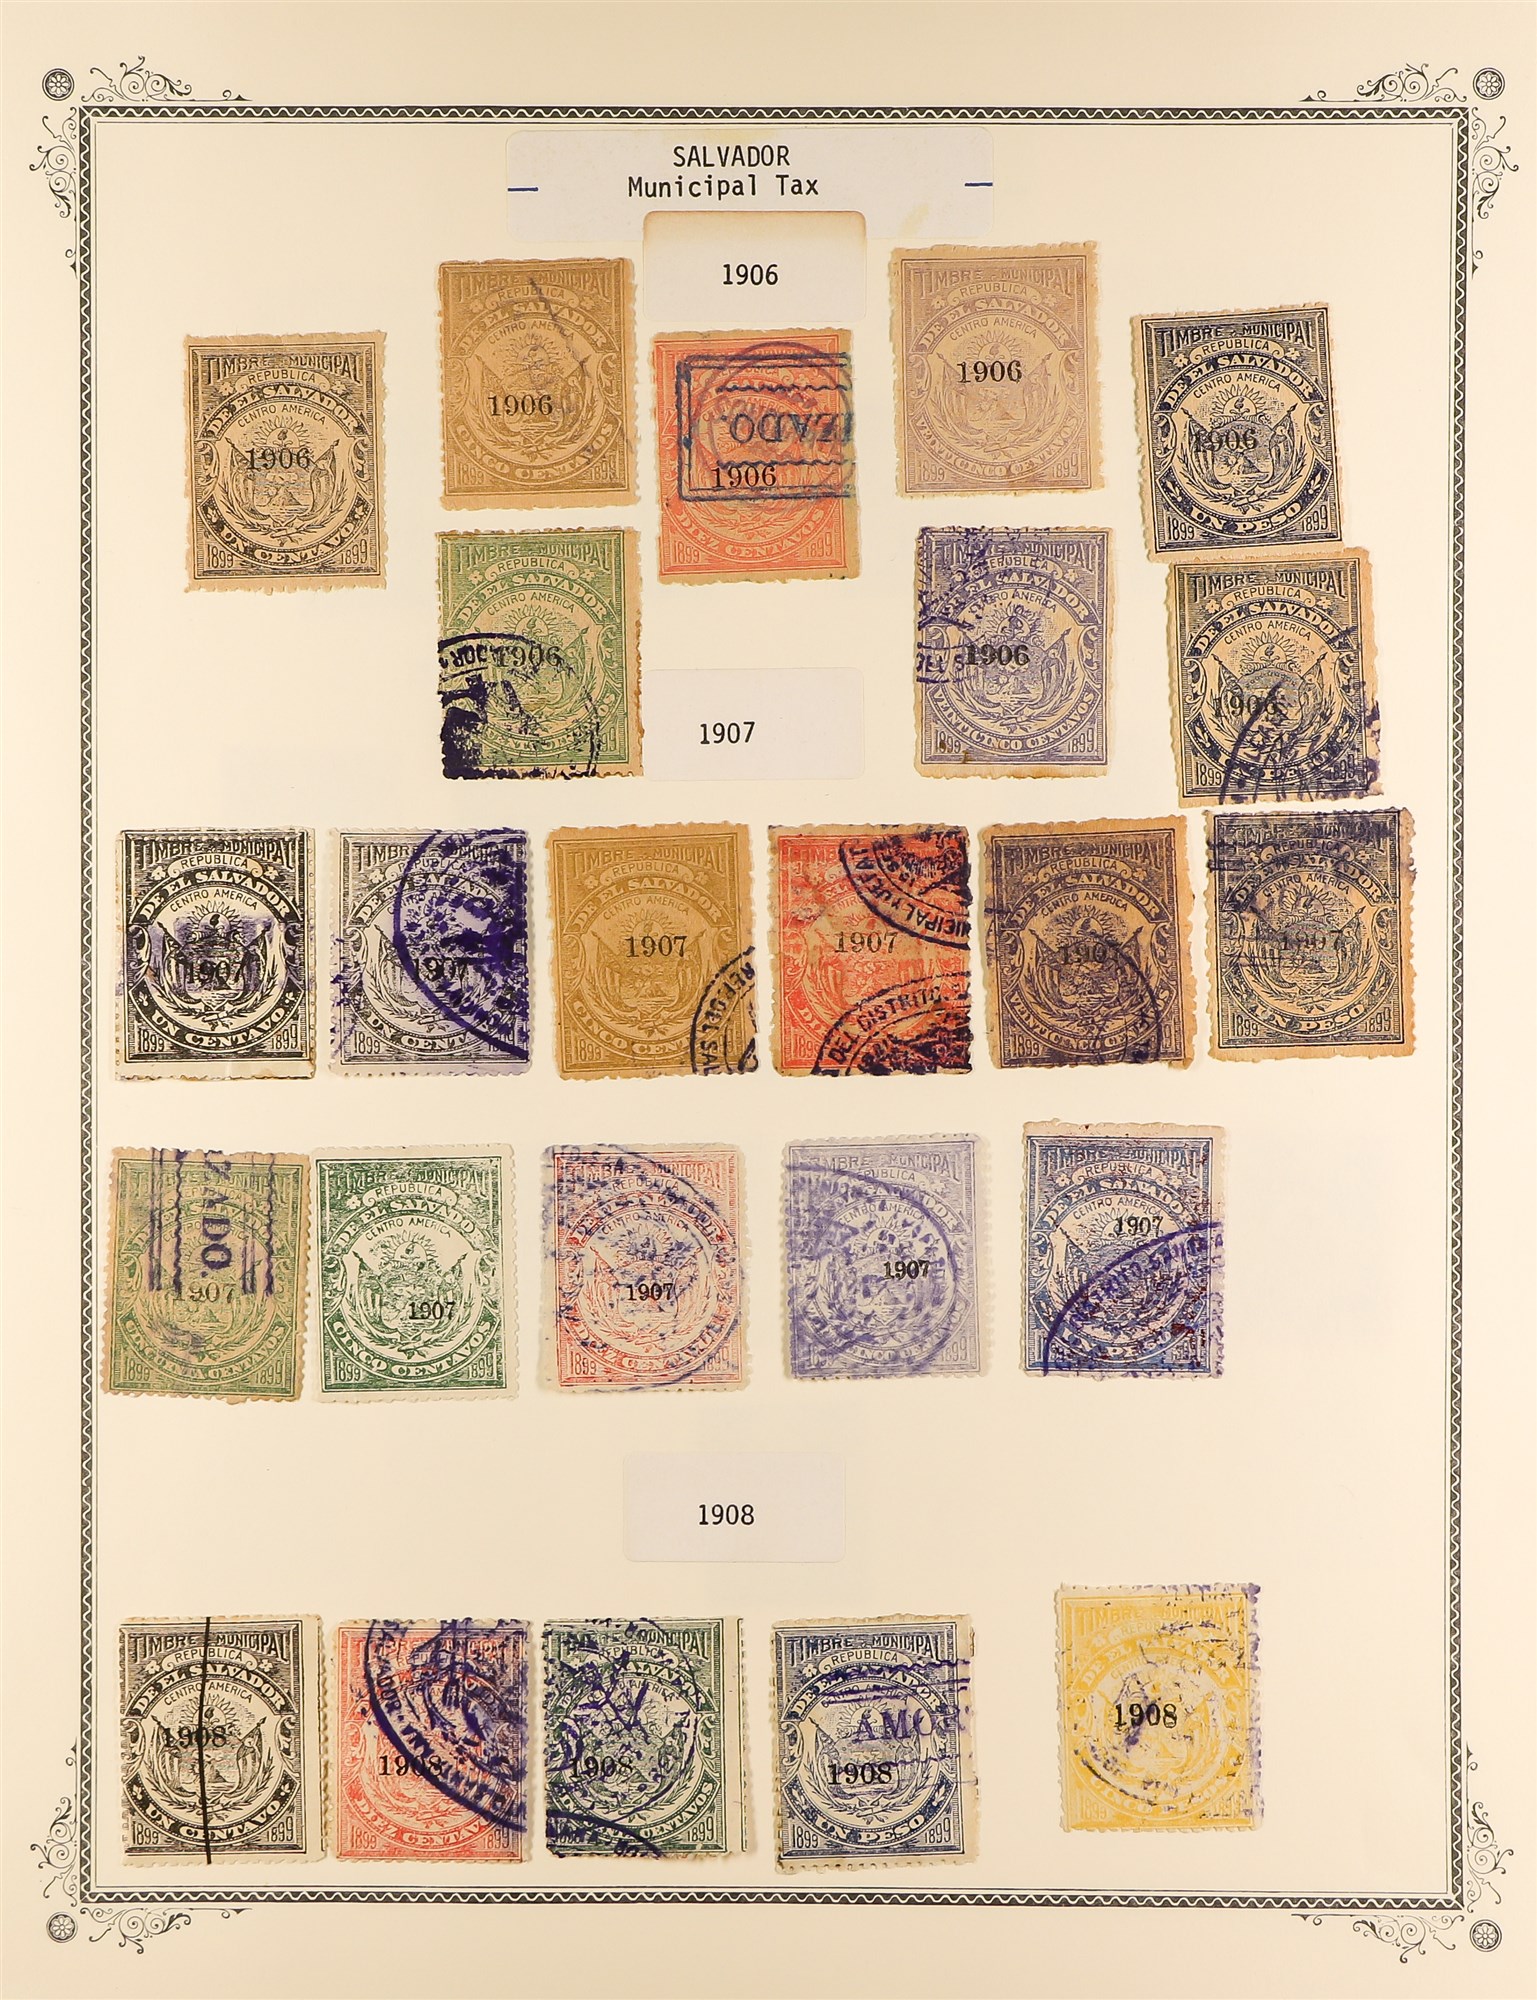 EL SALVADOR REVENUE STAMPS 1883 - 1925 mint & used collection of over 400 revenue stamps, on album - Image 21 of 27